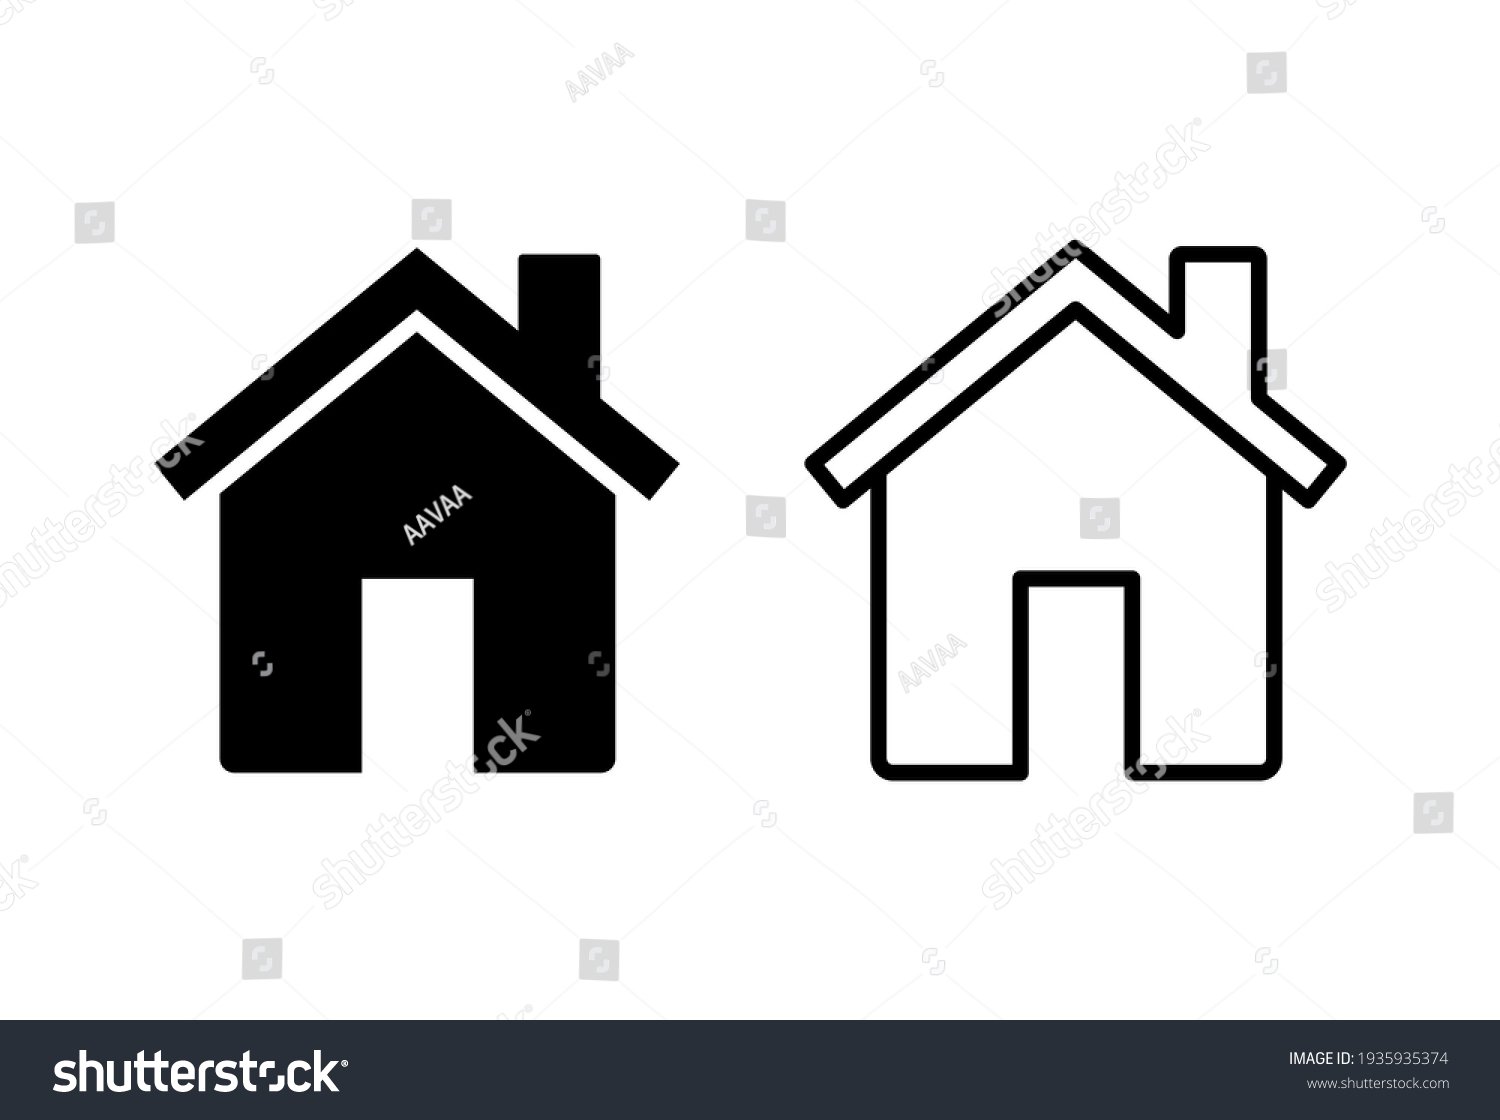 SVG of House icon set. Home icon vector svg